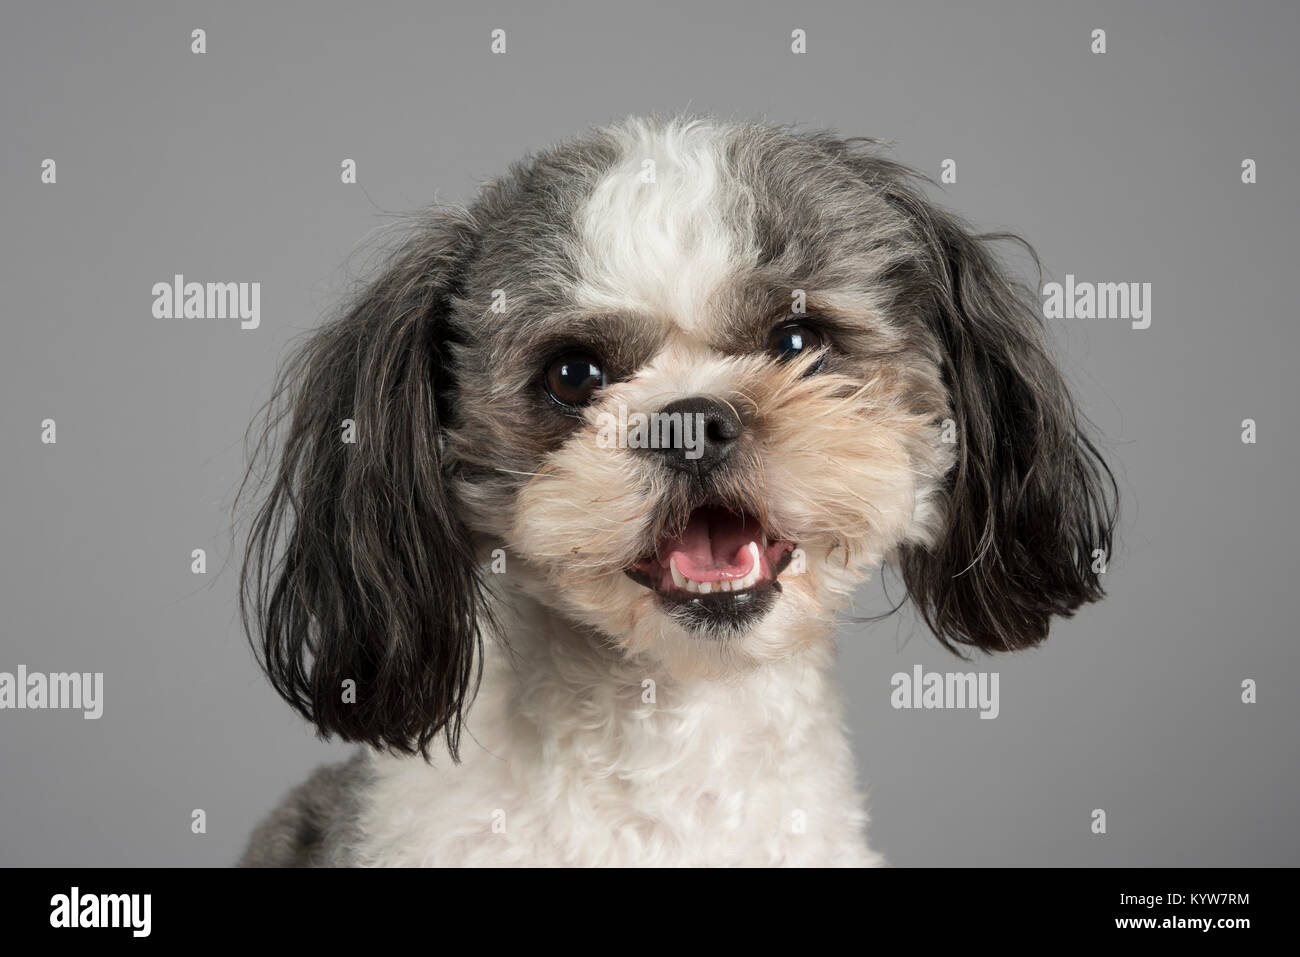 Shih Tzu X Bichon Frise High Resolution Stock Photography and Images - Alamy